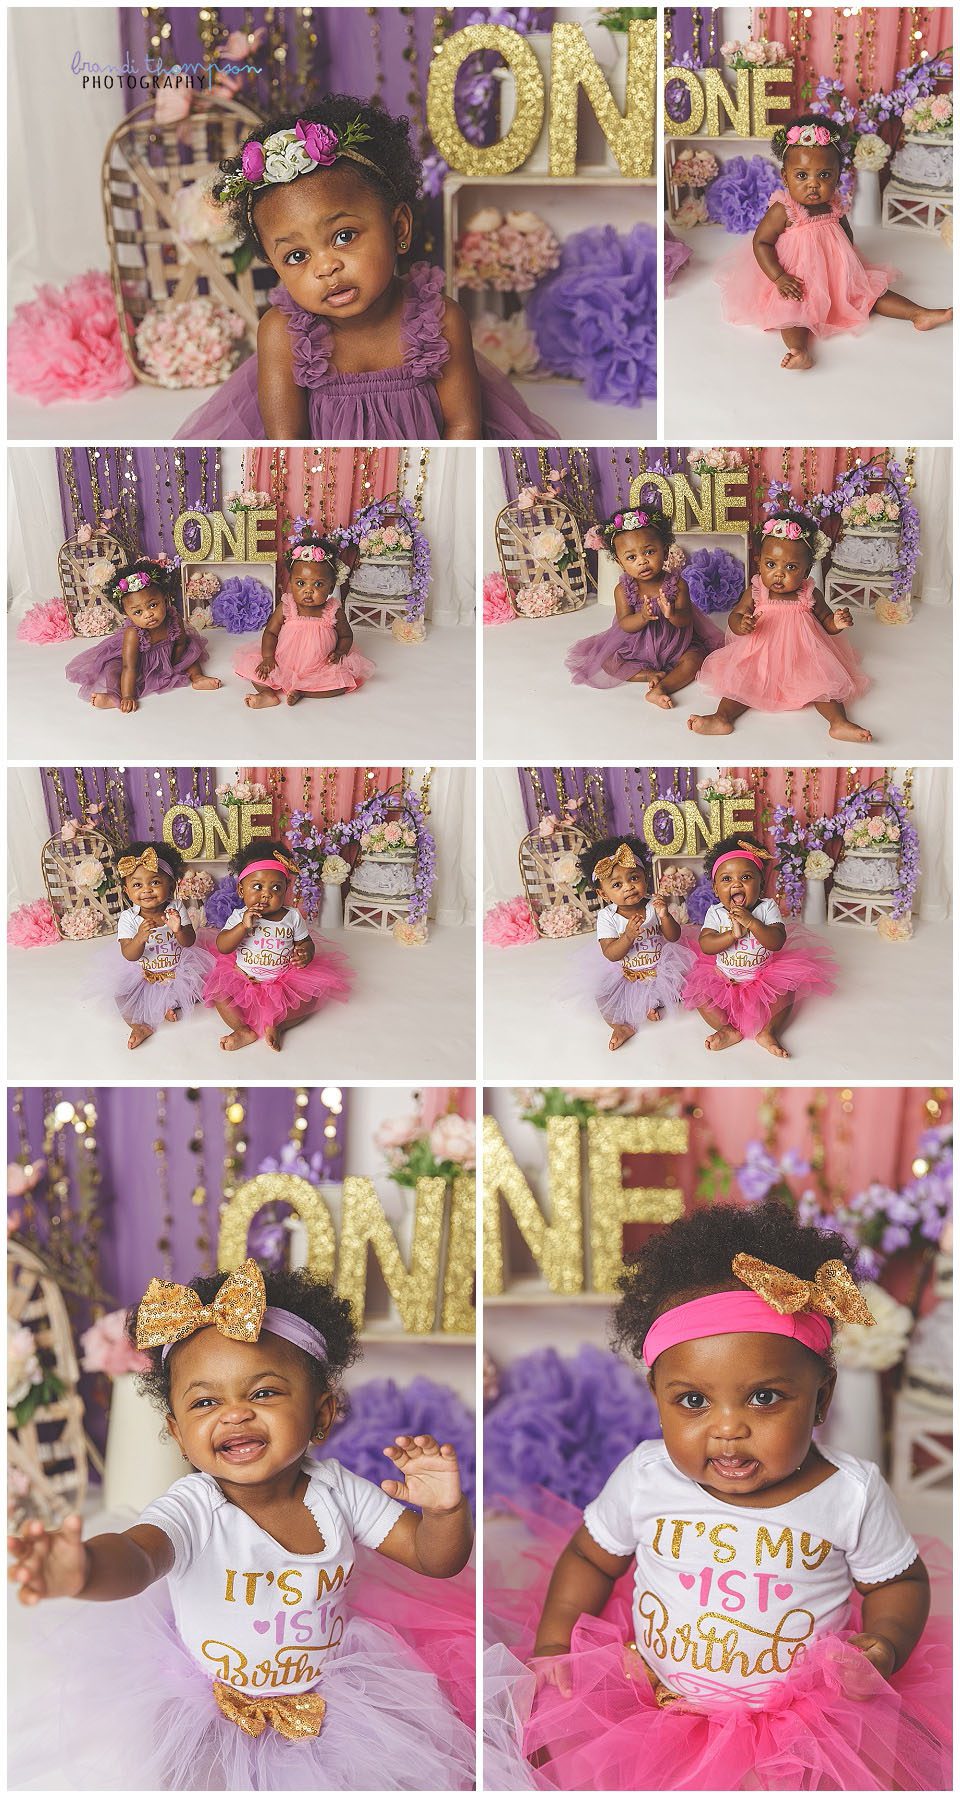 studio photos of twin Black one year old girls in various pink and purple outfits, with a pink, purple and gold backdrop with floral elements